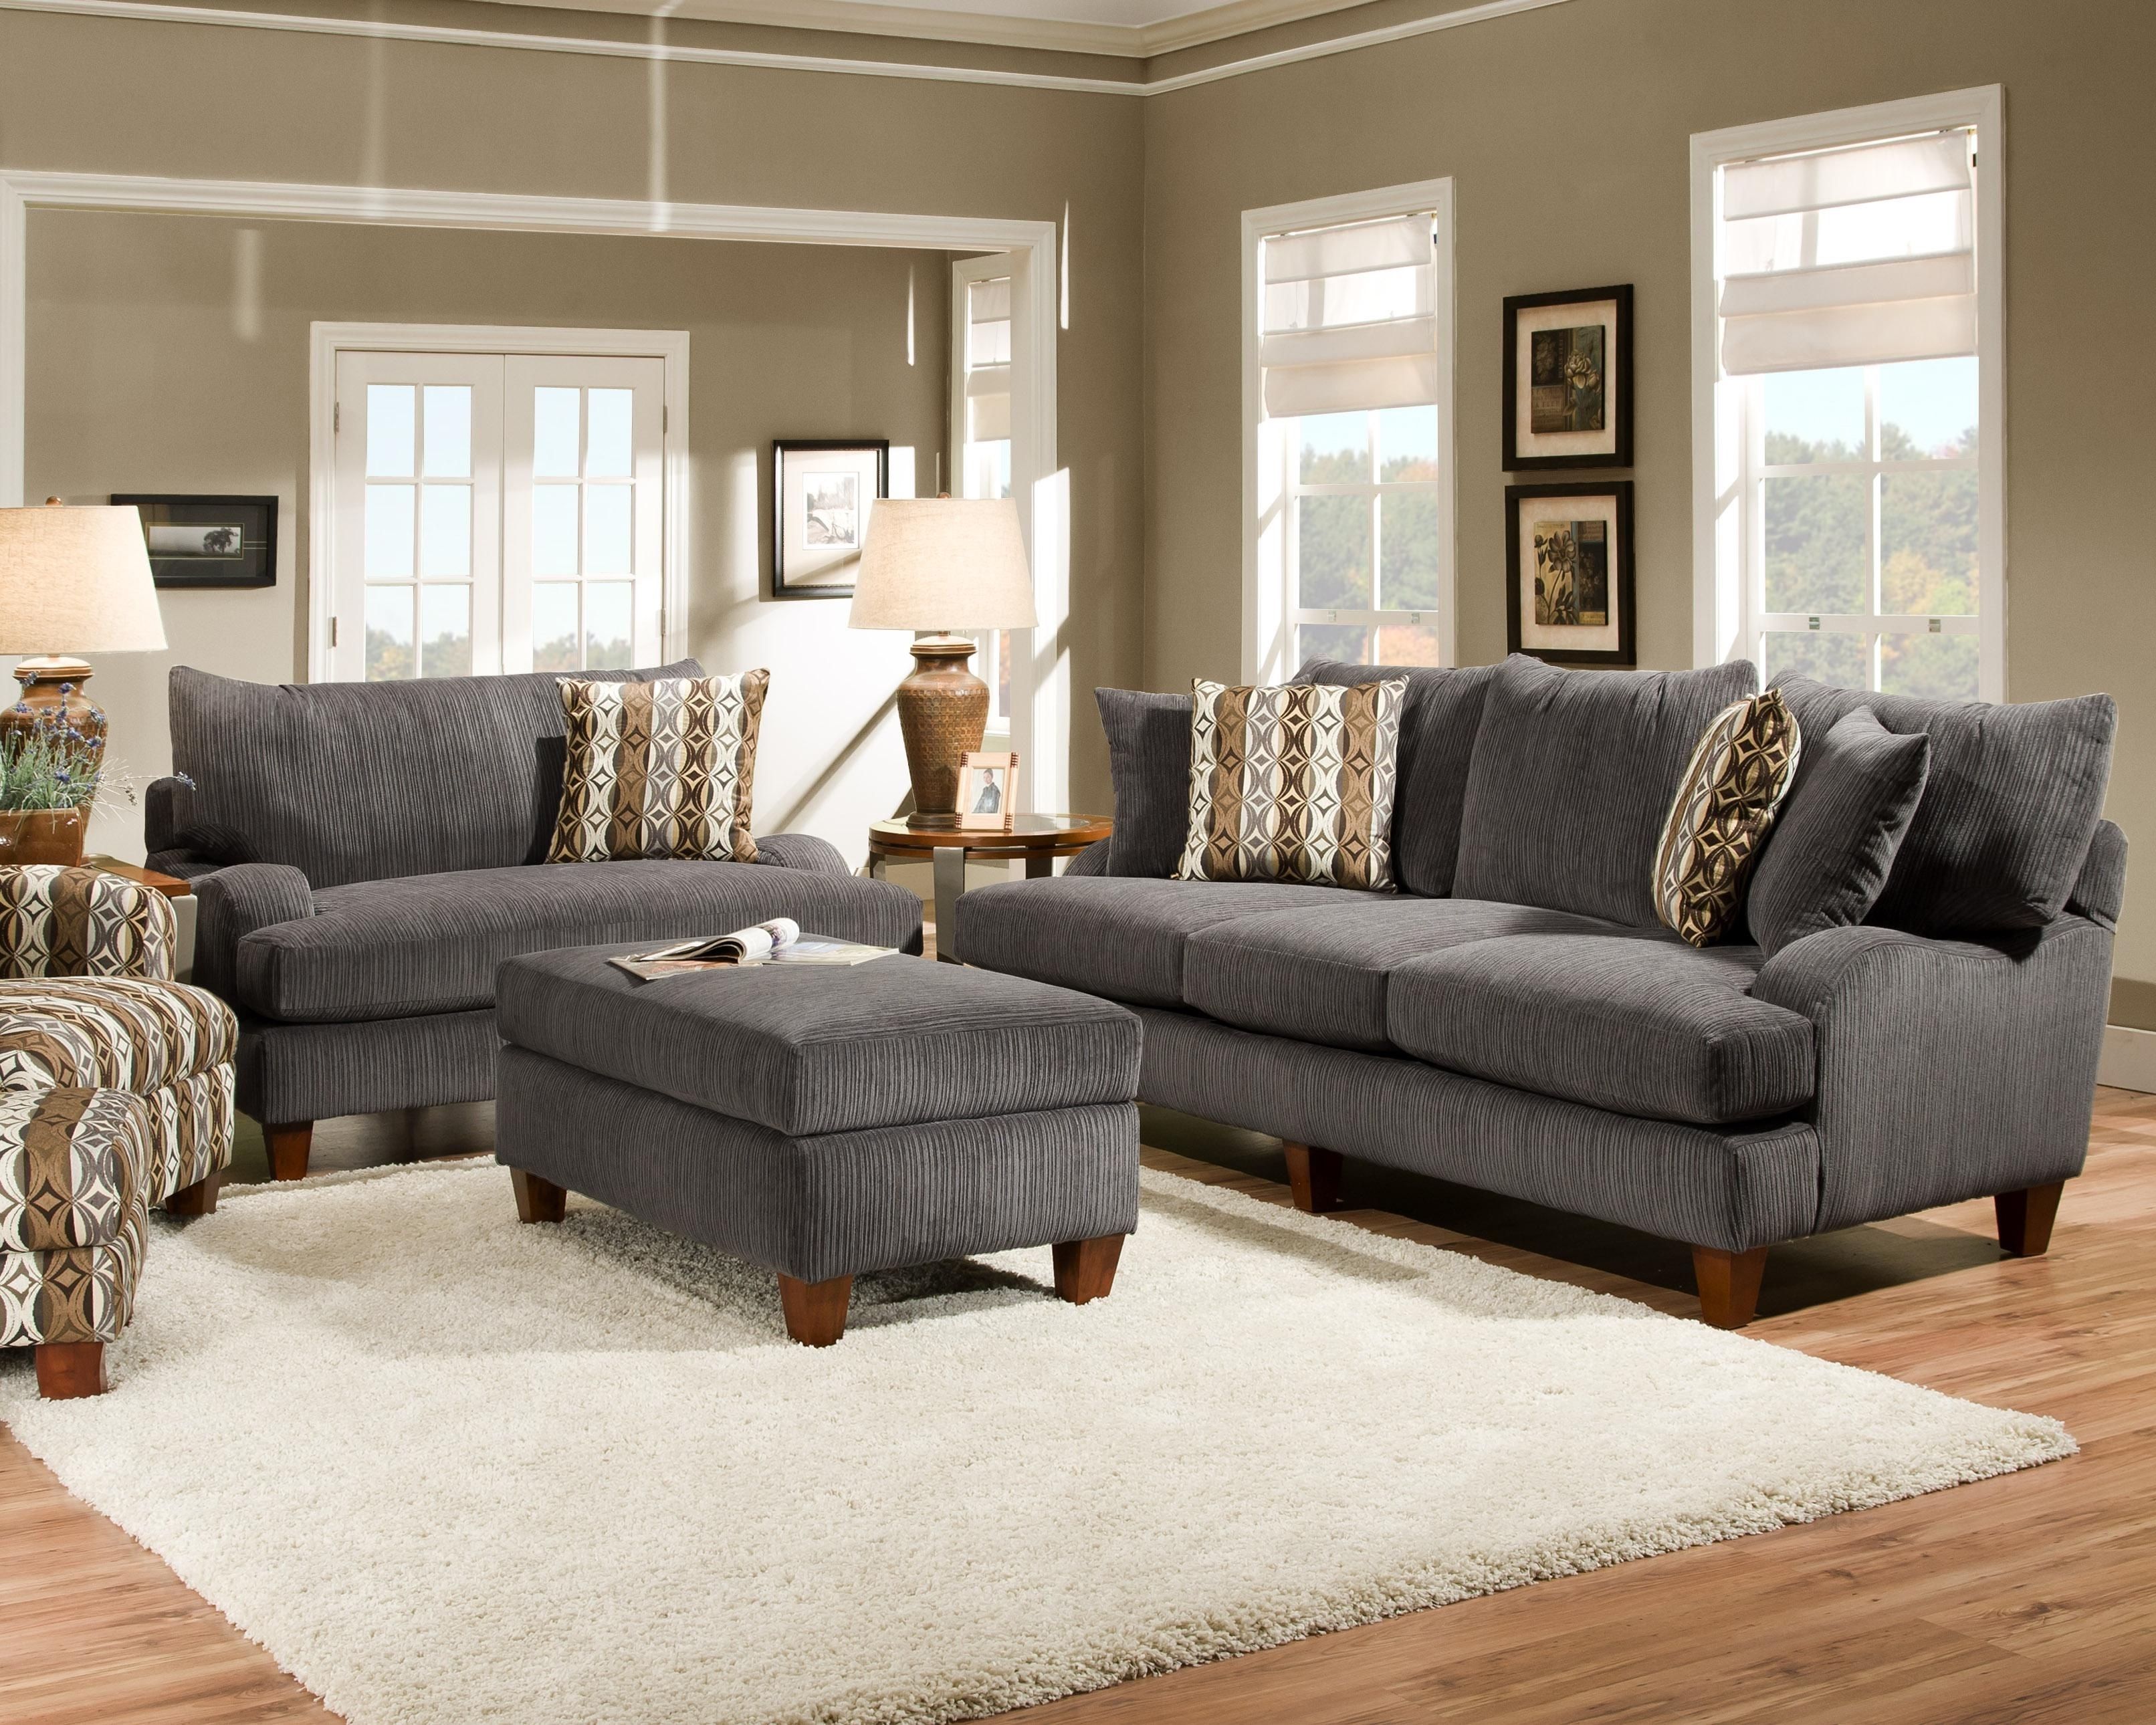 Latest Recliners Chairs & Sofa : Jcpenney Sofas Jc Penny Sofa Couches Jcp Inside Jcpenney Sectional Sofas (View 10 of 15)